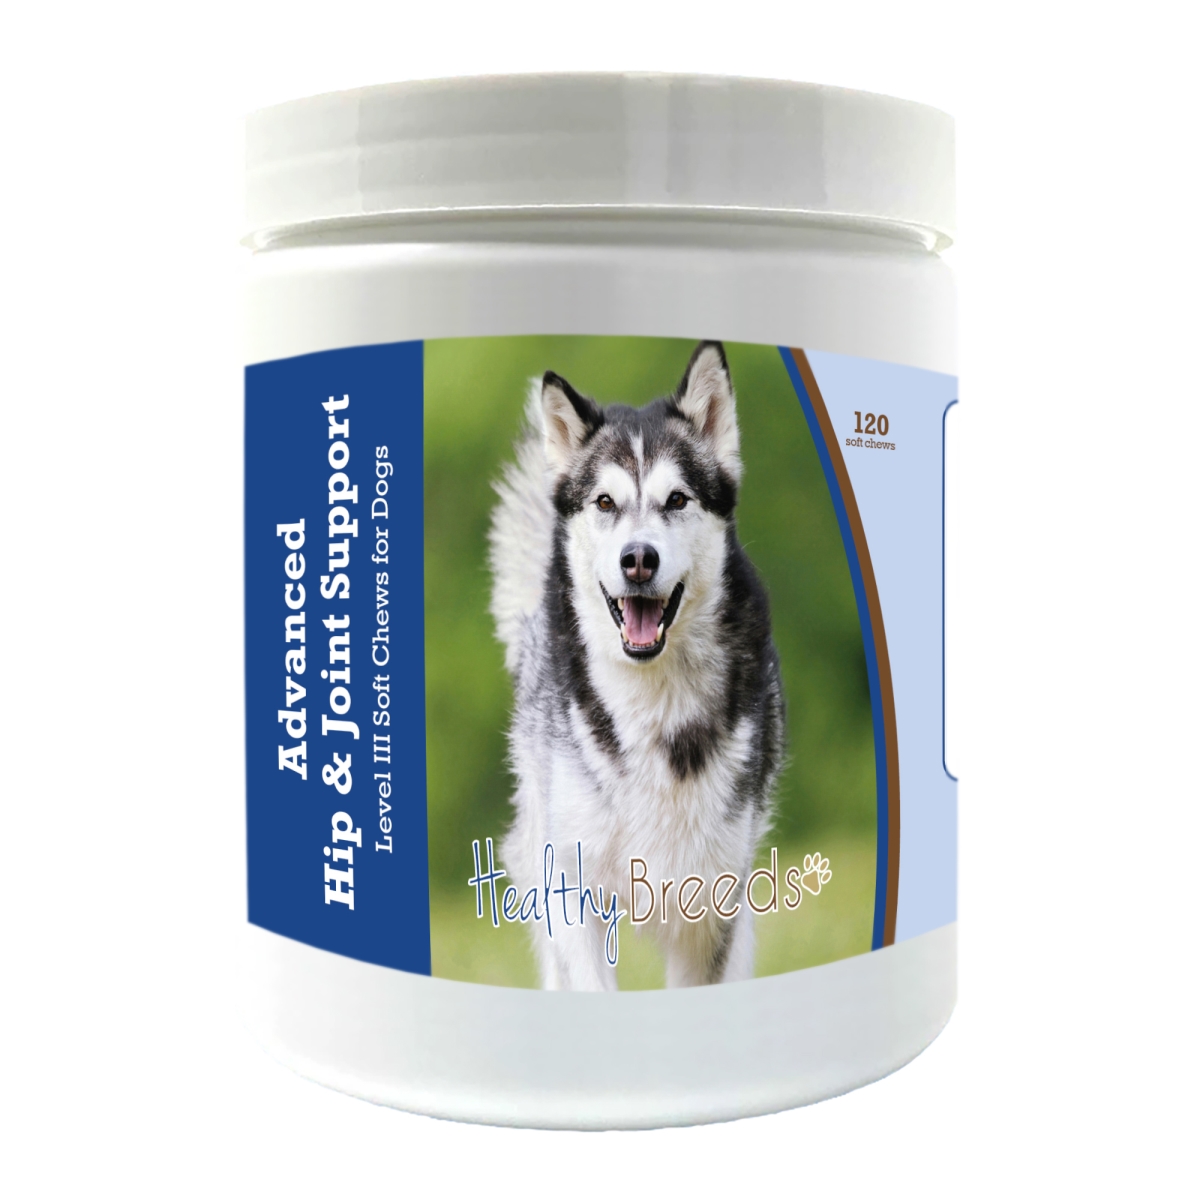 Picture of Healthy Breeds 192959897449 Alaskan Malamute Advanced Hip & Joint Support Level III Soft Chews for Dogs